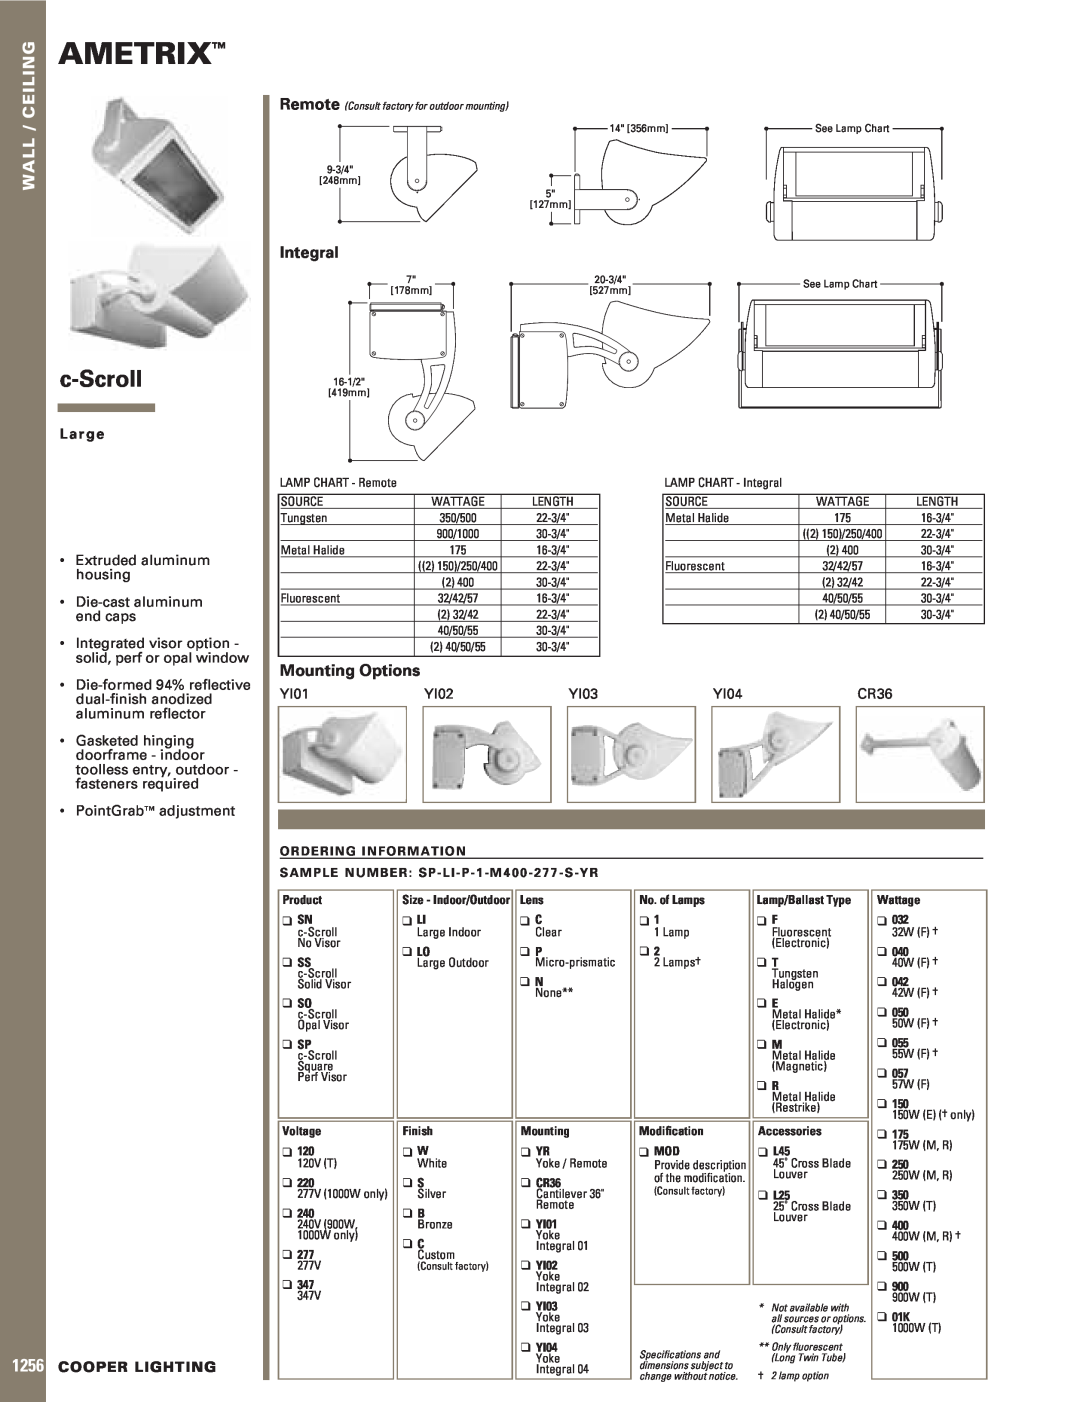 Cooper Lighting Wall/Ceiling Lighting specifications Ametrix, c-Scroll, 1256, Wall / Ceiling, Integral, Mounting Options 